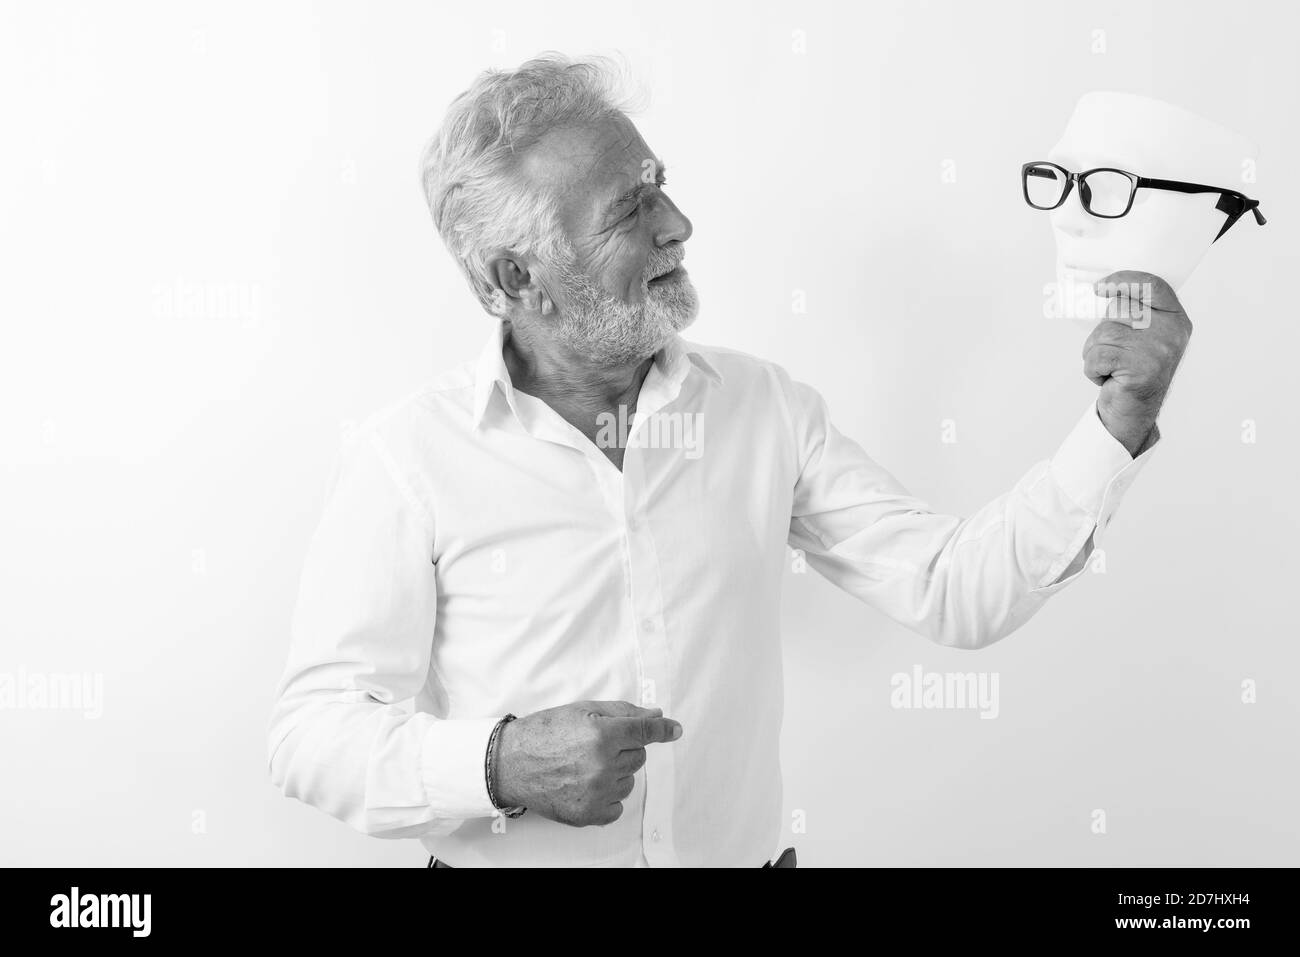 Profile view of happy senior bearded man smiling and looking at white mask with eyeglasses against white background Stock Photo